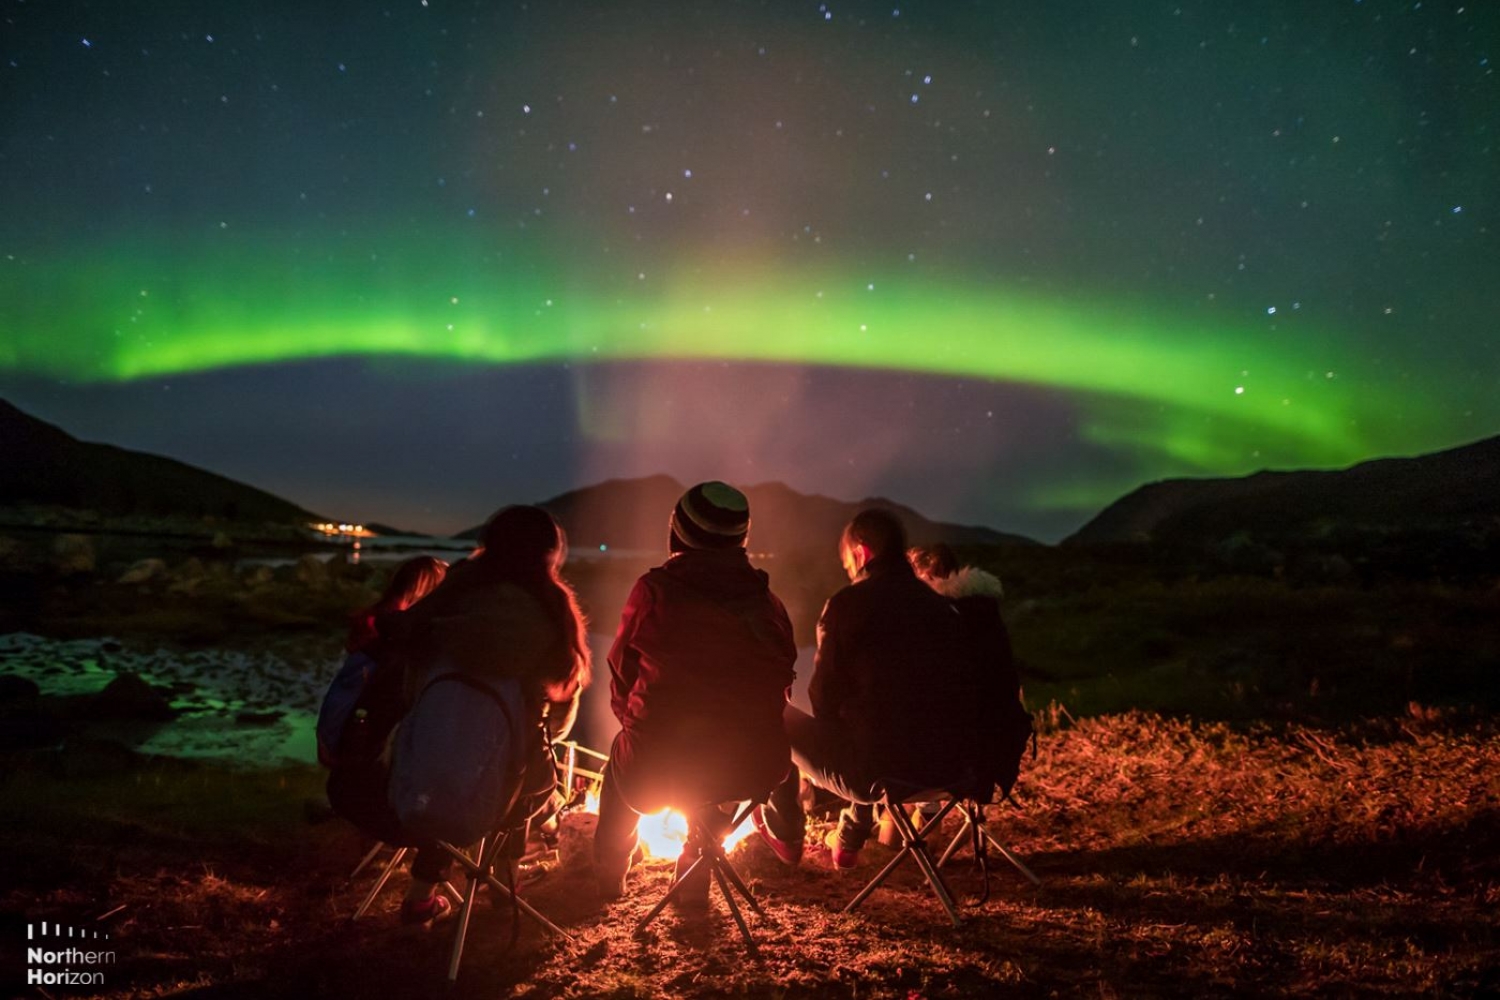 People gathered around a bonfire looking at the Northern Lights